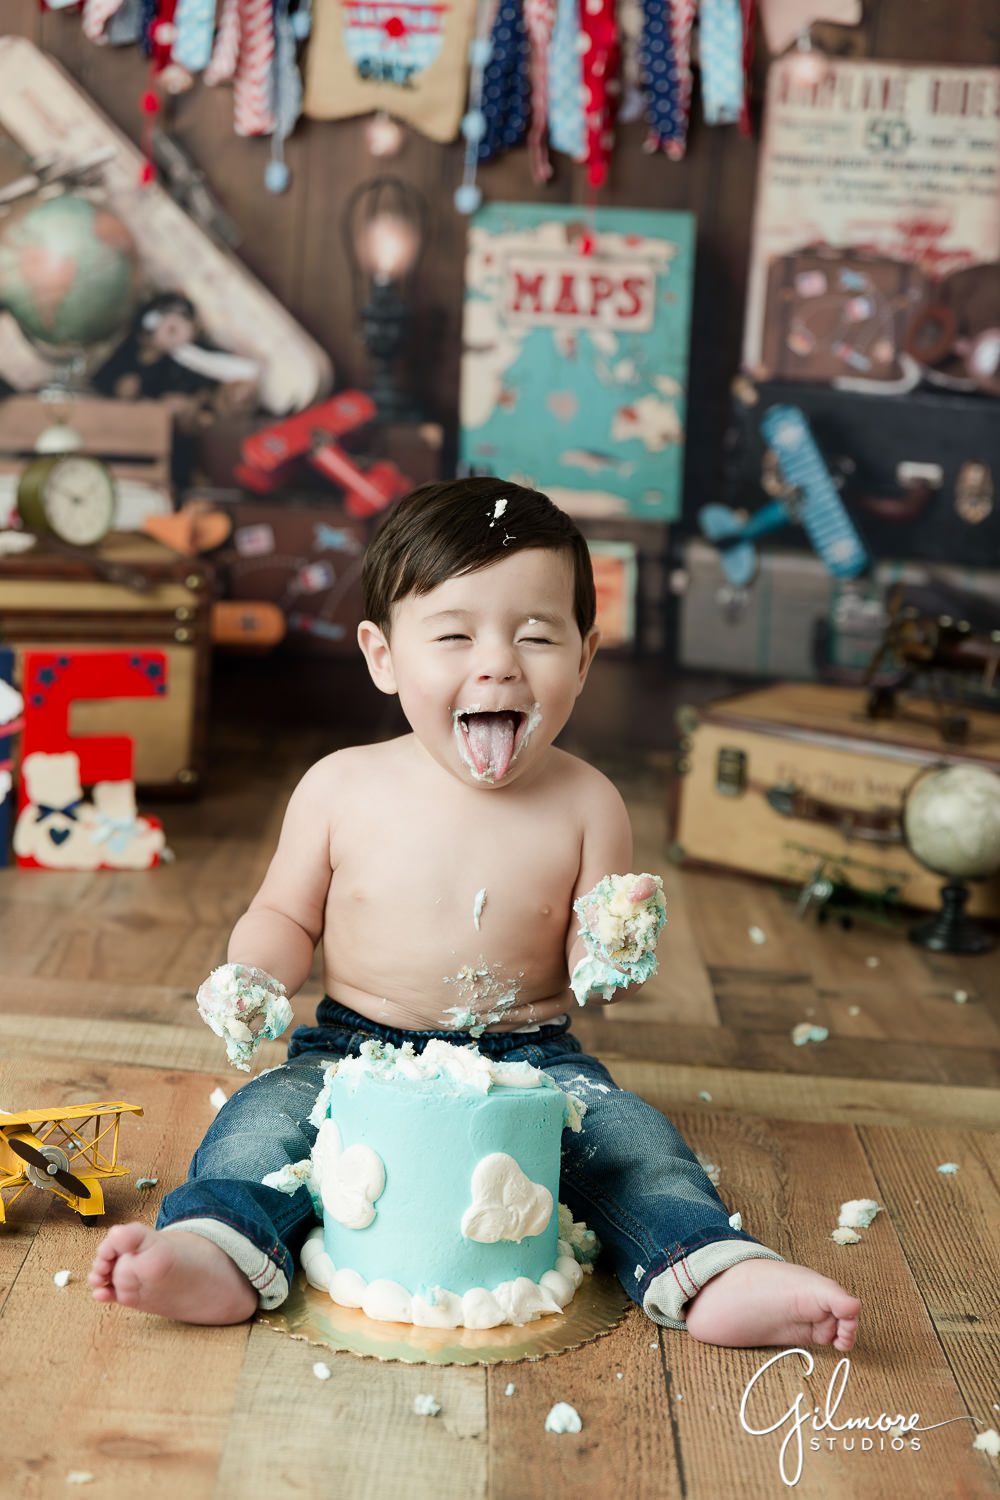 Aviator Cake Smash - Time Flies 1st Birthday Session, clouds, blue sky, biplane, airplanes, one year old, frenchs cupcake bakery